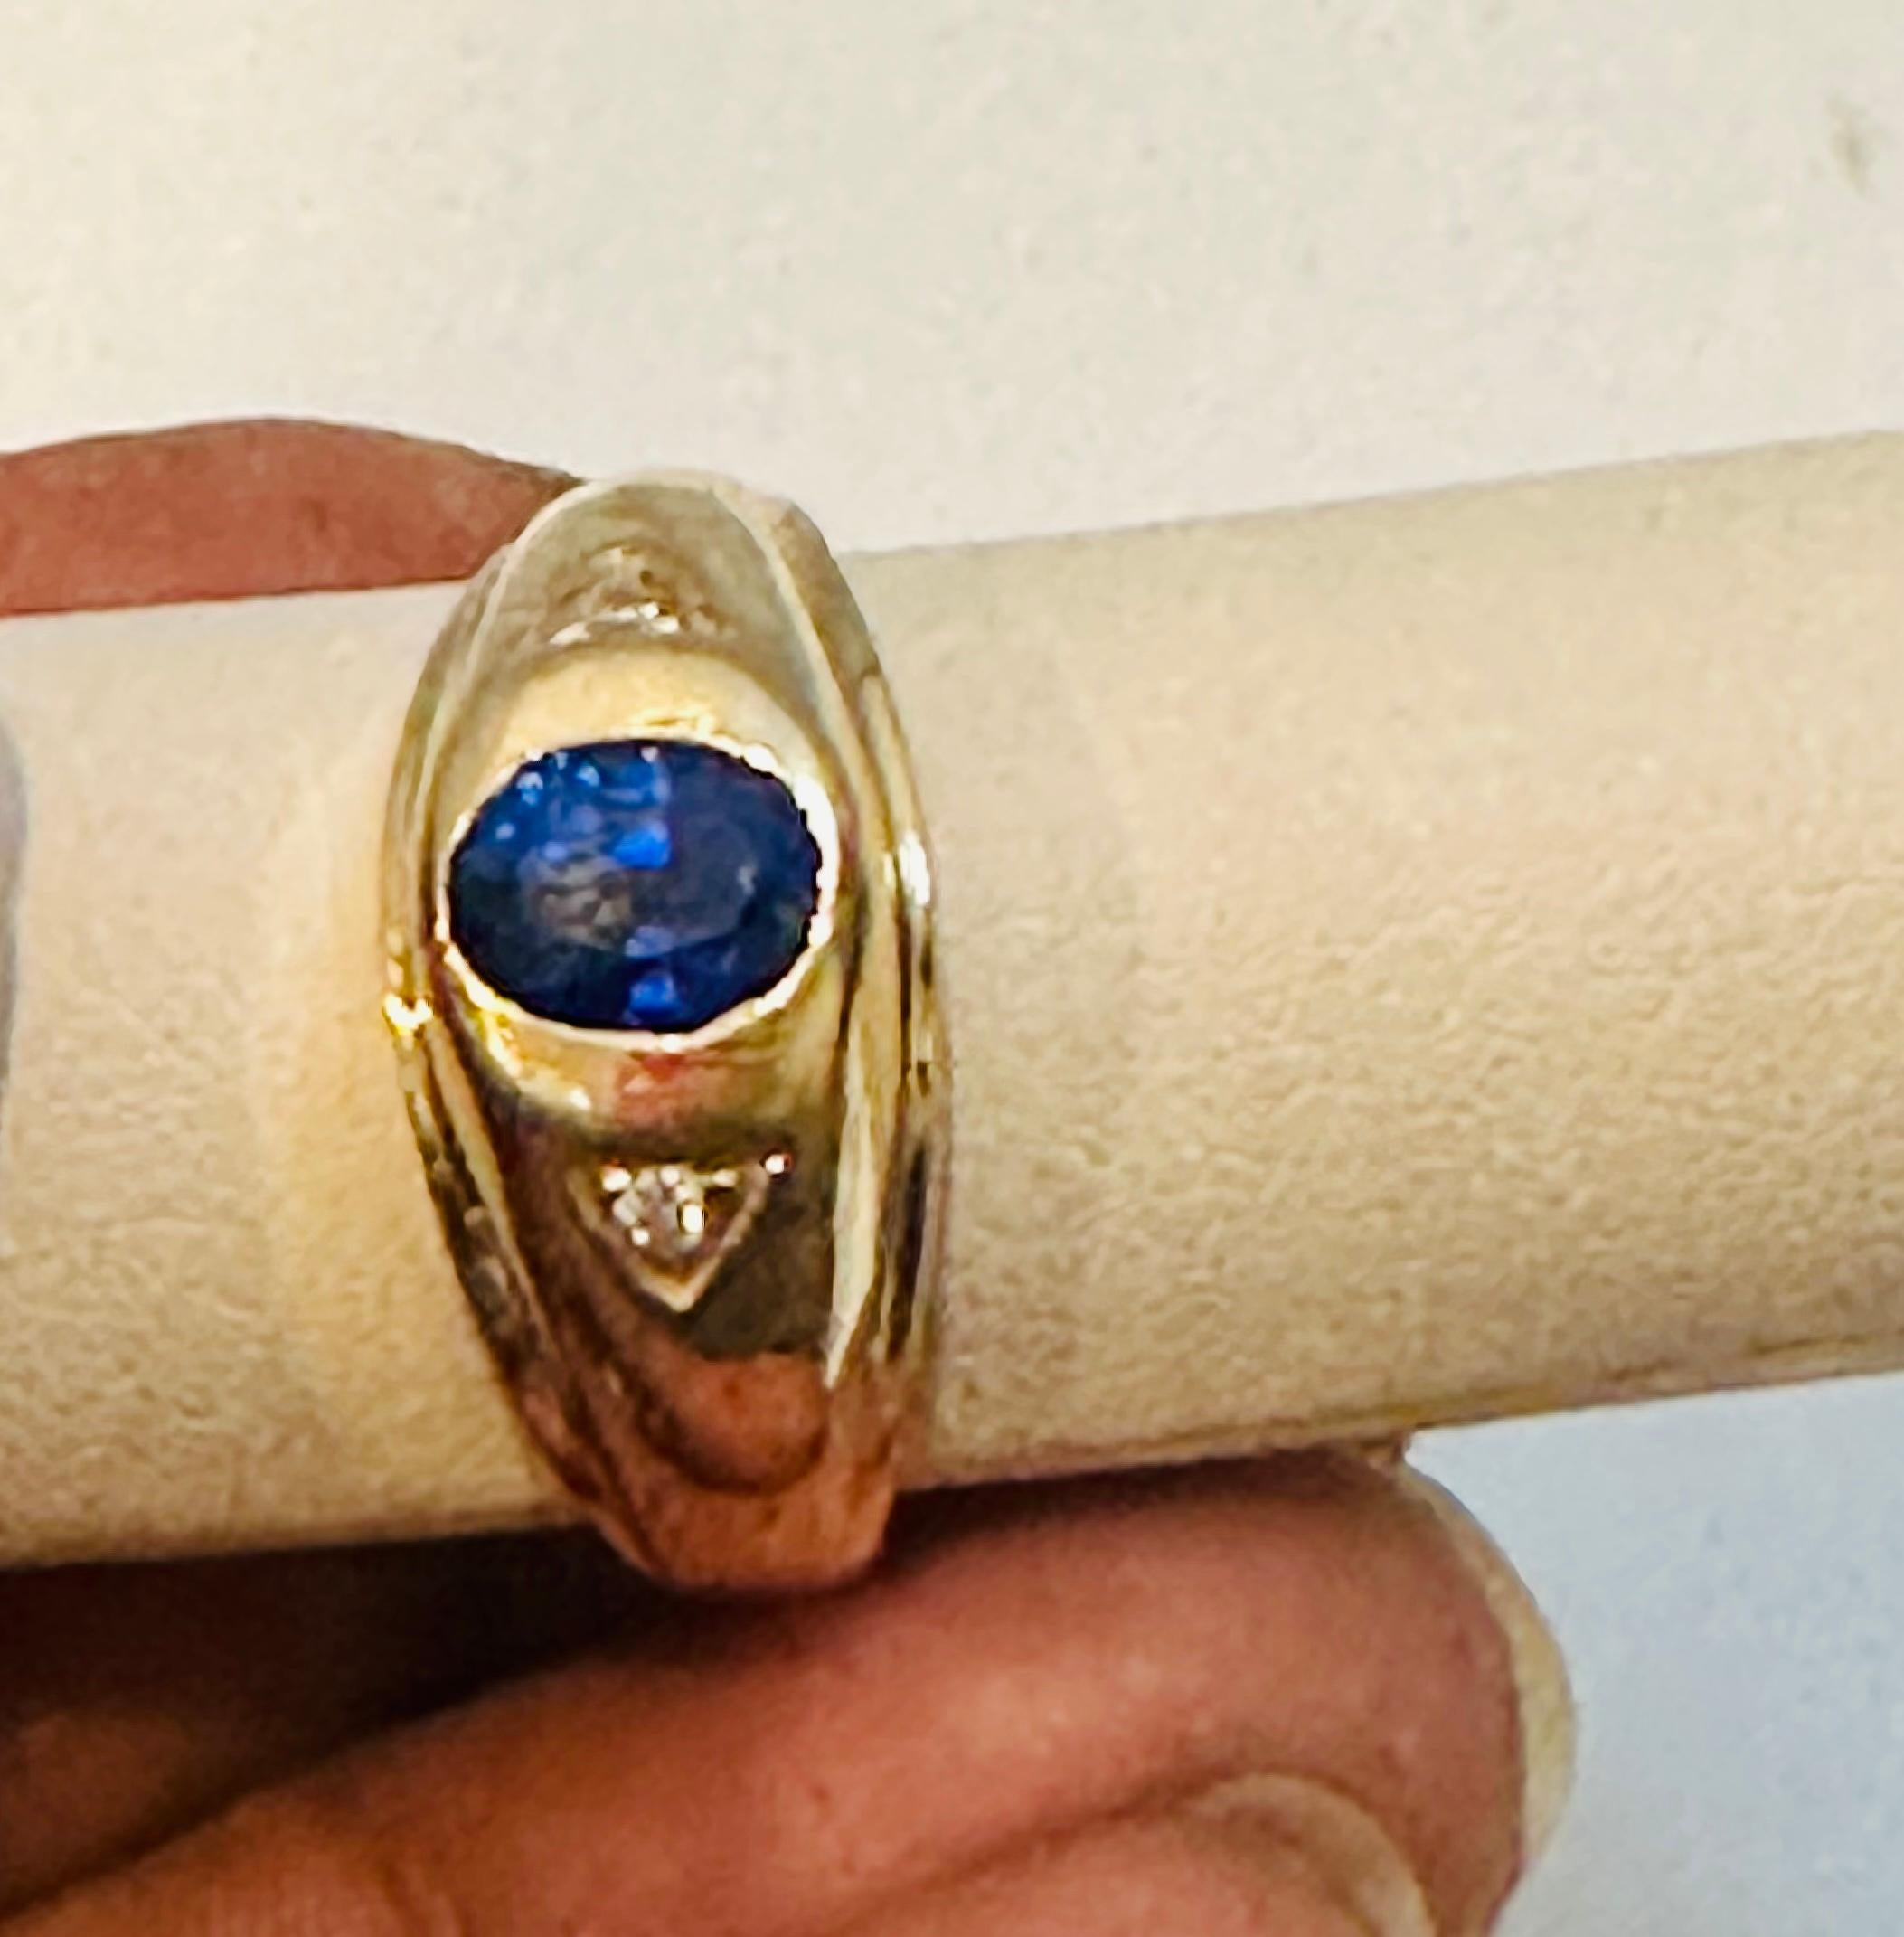 Oval Natural  Blue Sapphire & Diamond Engagement Ring in 18 Karat Yellow Gold
Approximately 1 1/4 Ct Oval Blue  Ceylon Sapphire 
18 Karat yellow Gold 6.57 Grams
Ring Size 10.5 ( it can be resized to any size for free of charge)
Natural Sapphire of